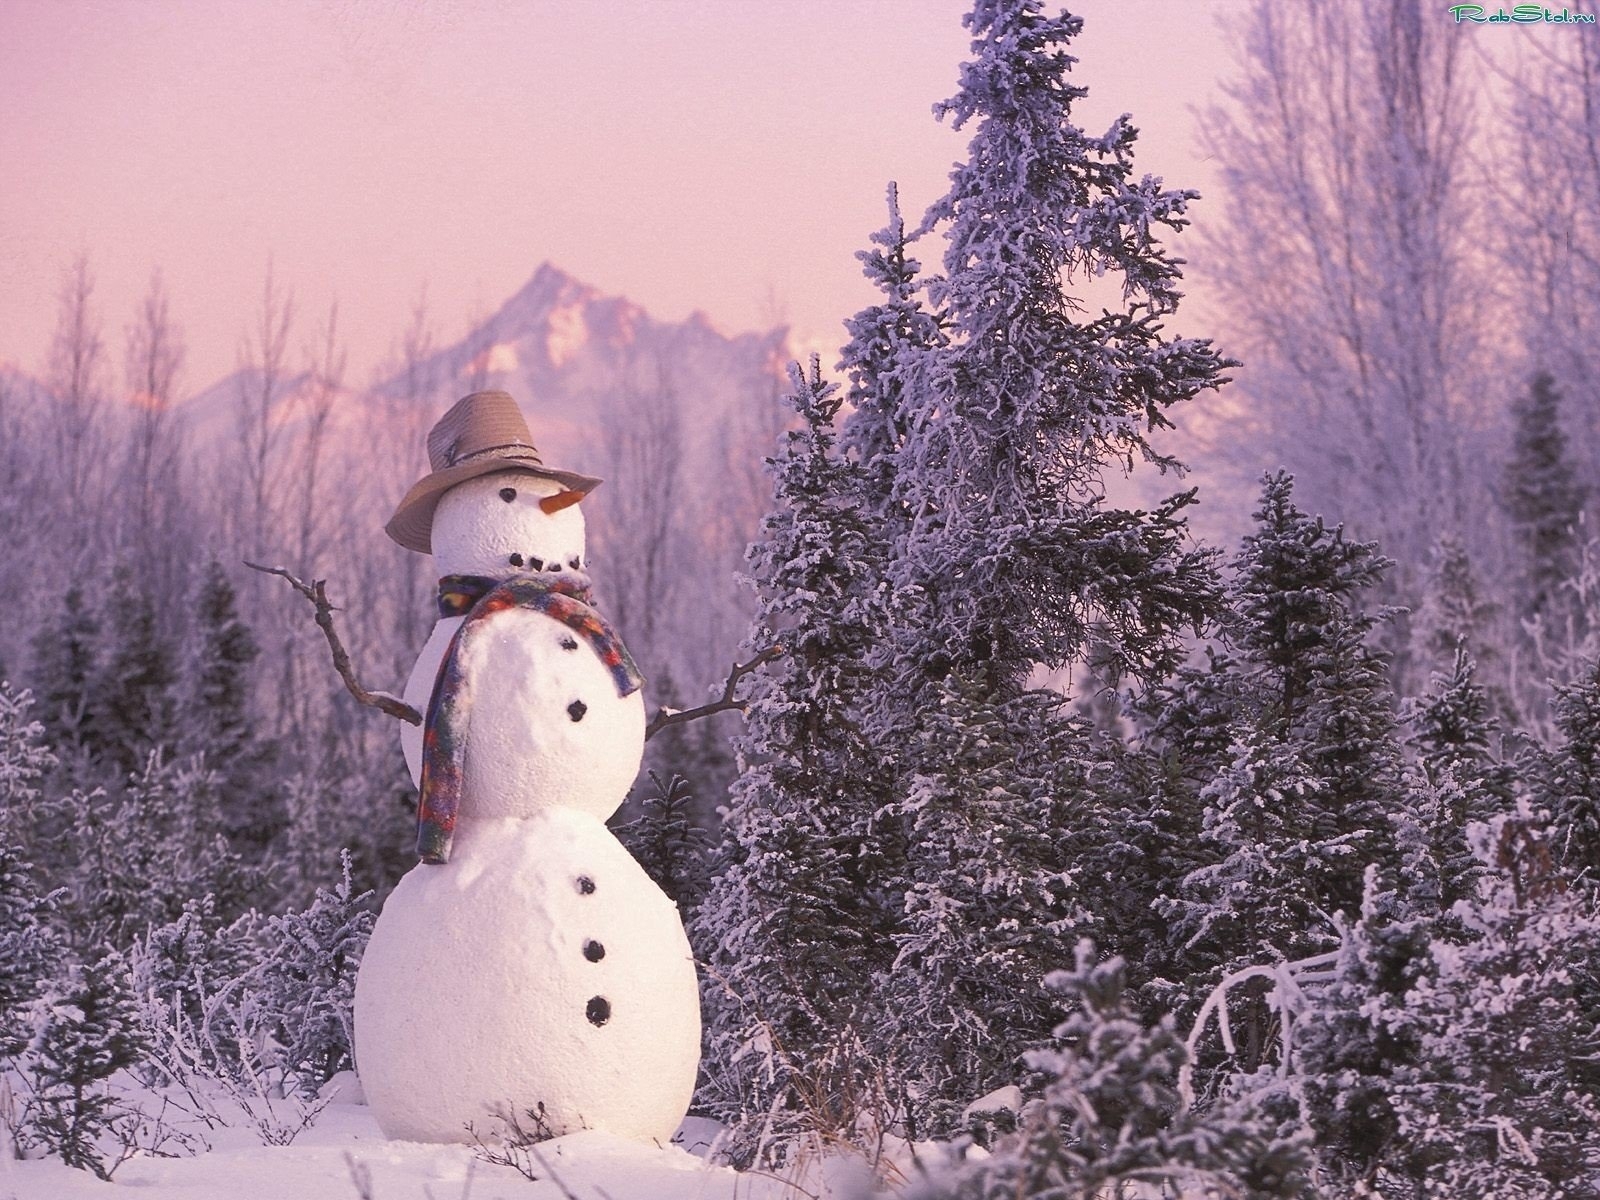 android winter, christmas xmas, landscape, new year, snow, fir trees, snowman